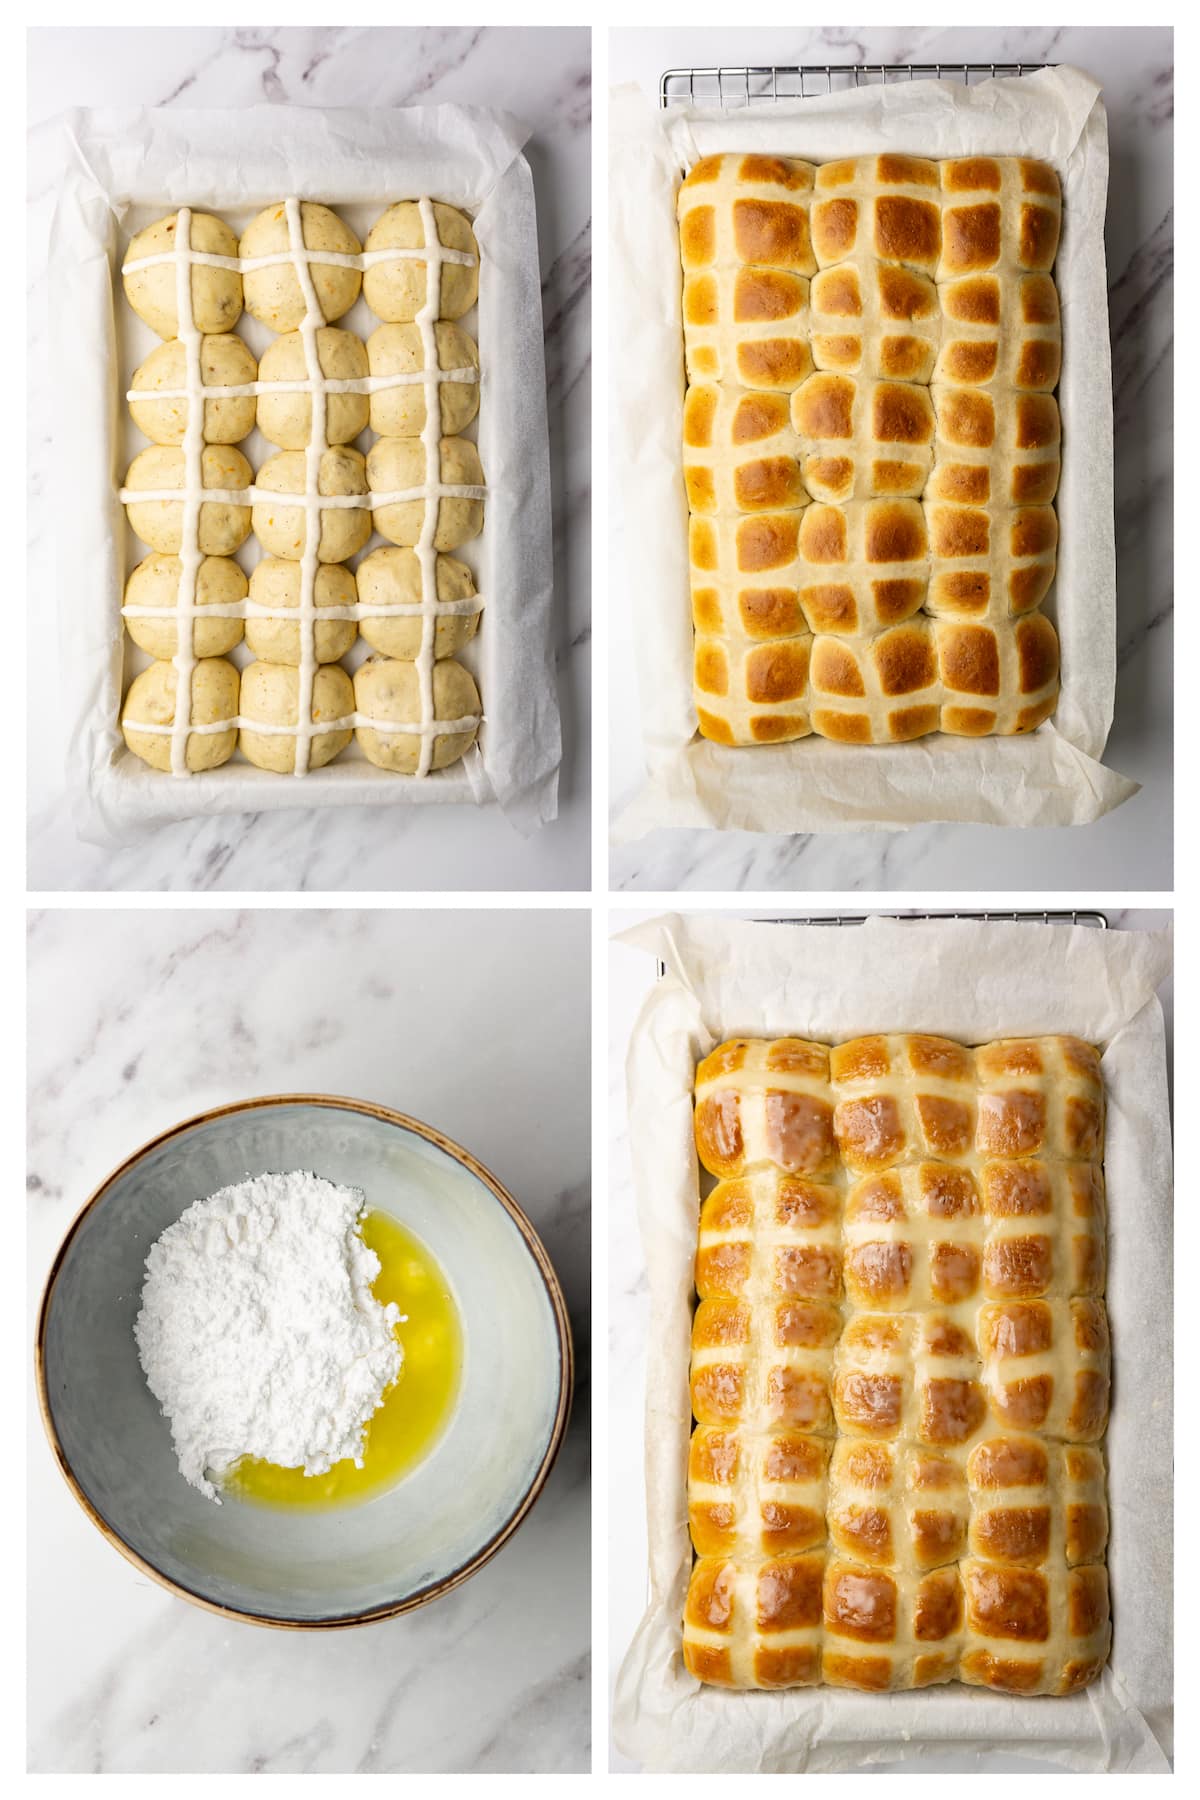 Collage image showing six steps to bake and glaze hot cross buns.